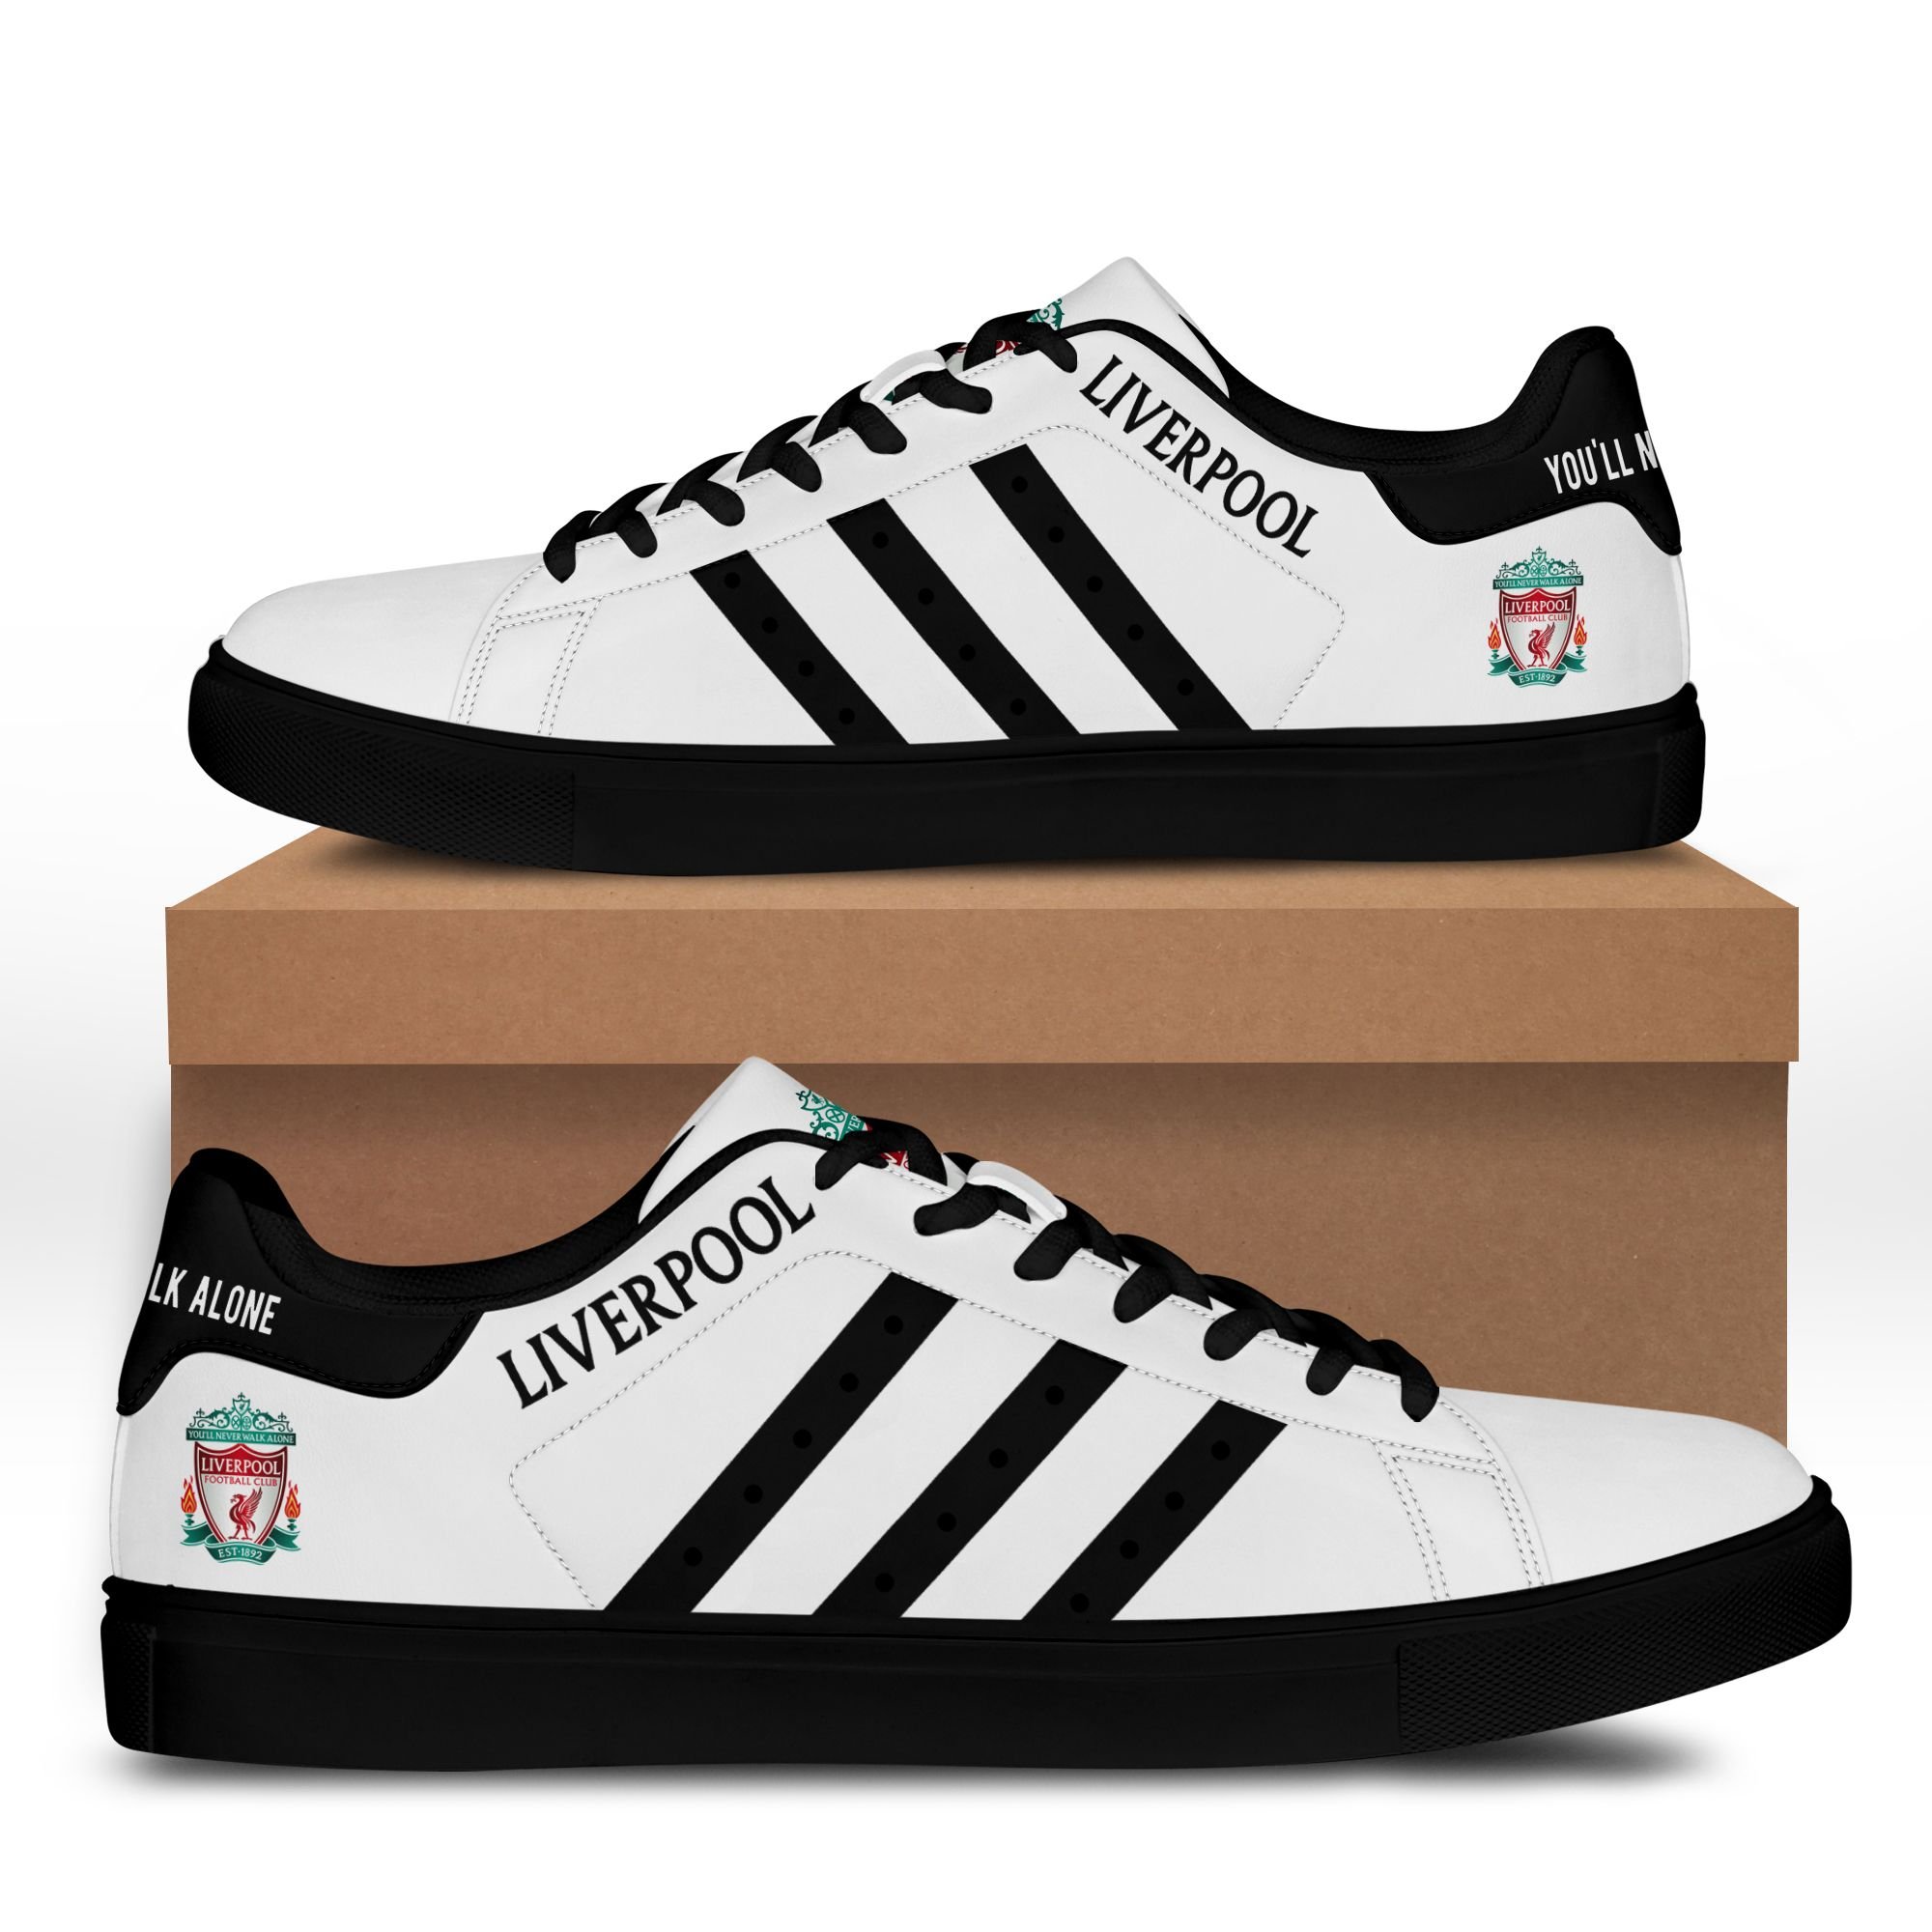 Liverpool stan smith shoes - Picture 3